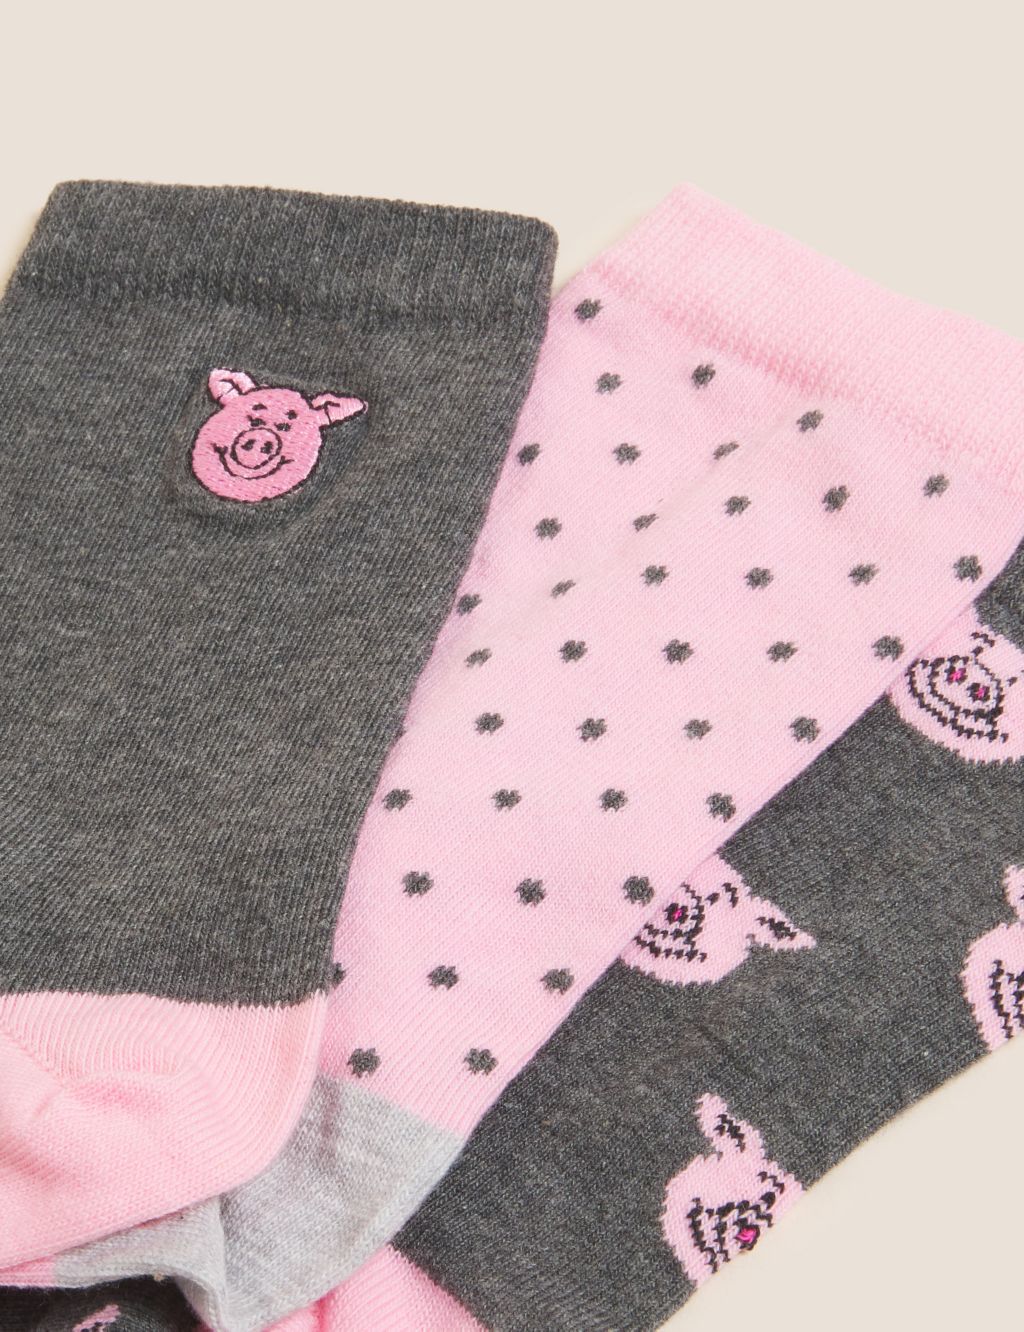 5pk Cotton Rich Percy Pig™ Ankle High Socks image 2